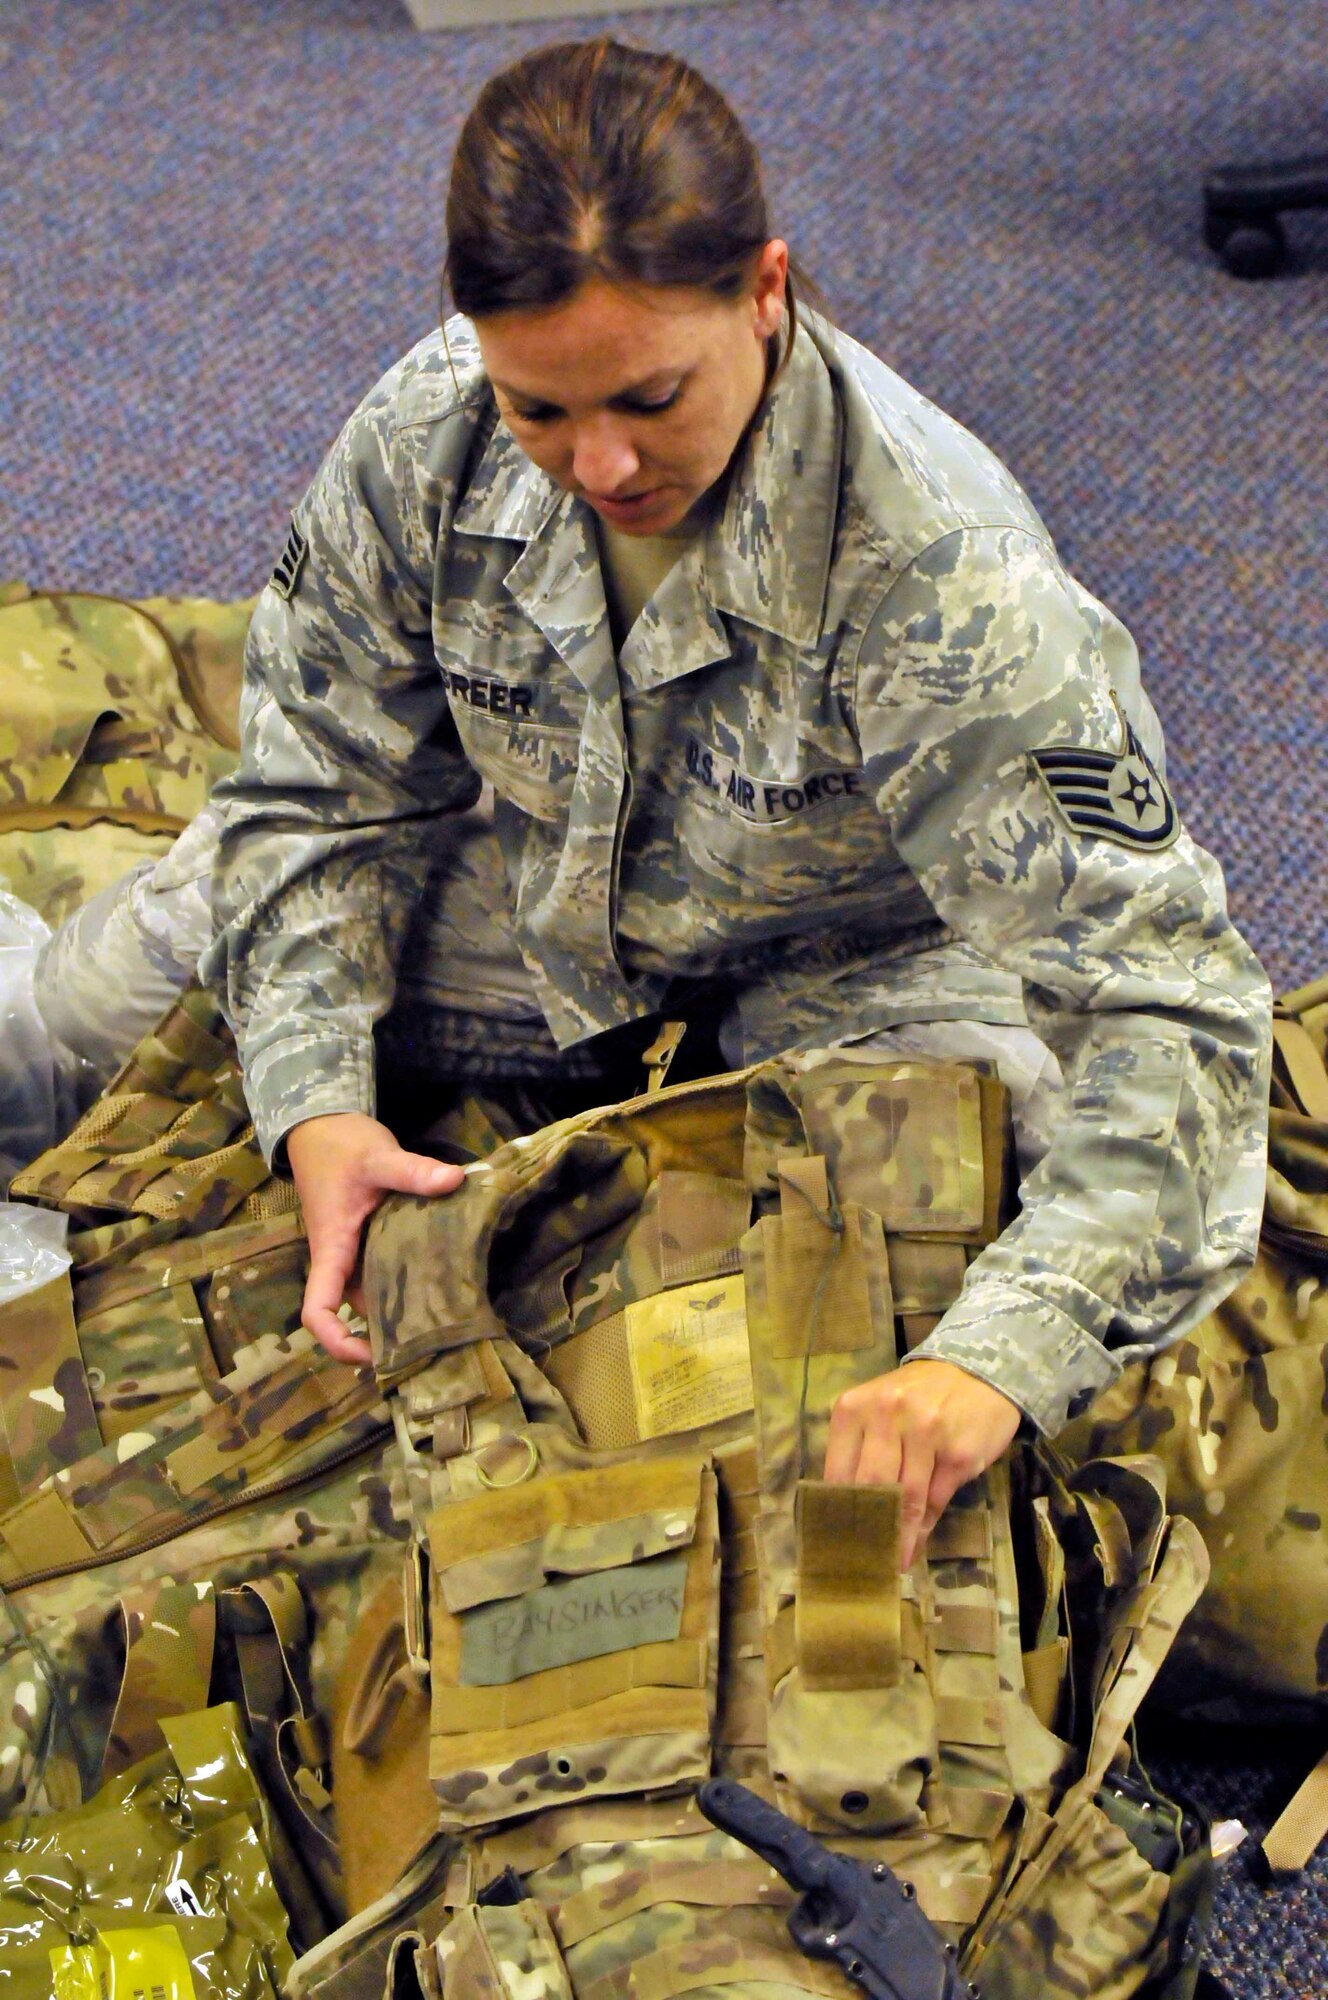 PATRICK AIR FORCE BASE, Fla. - Staff Sgt. Stacie Greer, aircrew flight equipment specialist, 920th Operations Support Squadron, packs a pararescueman's bag in preparation for deployment. Whether it's an air show, deployment, or day-to-day operations, AFE specialists are responsible for keeping equipment ready to go. (U.S. Air Force Photo/Capt. Ryan Liss)